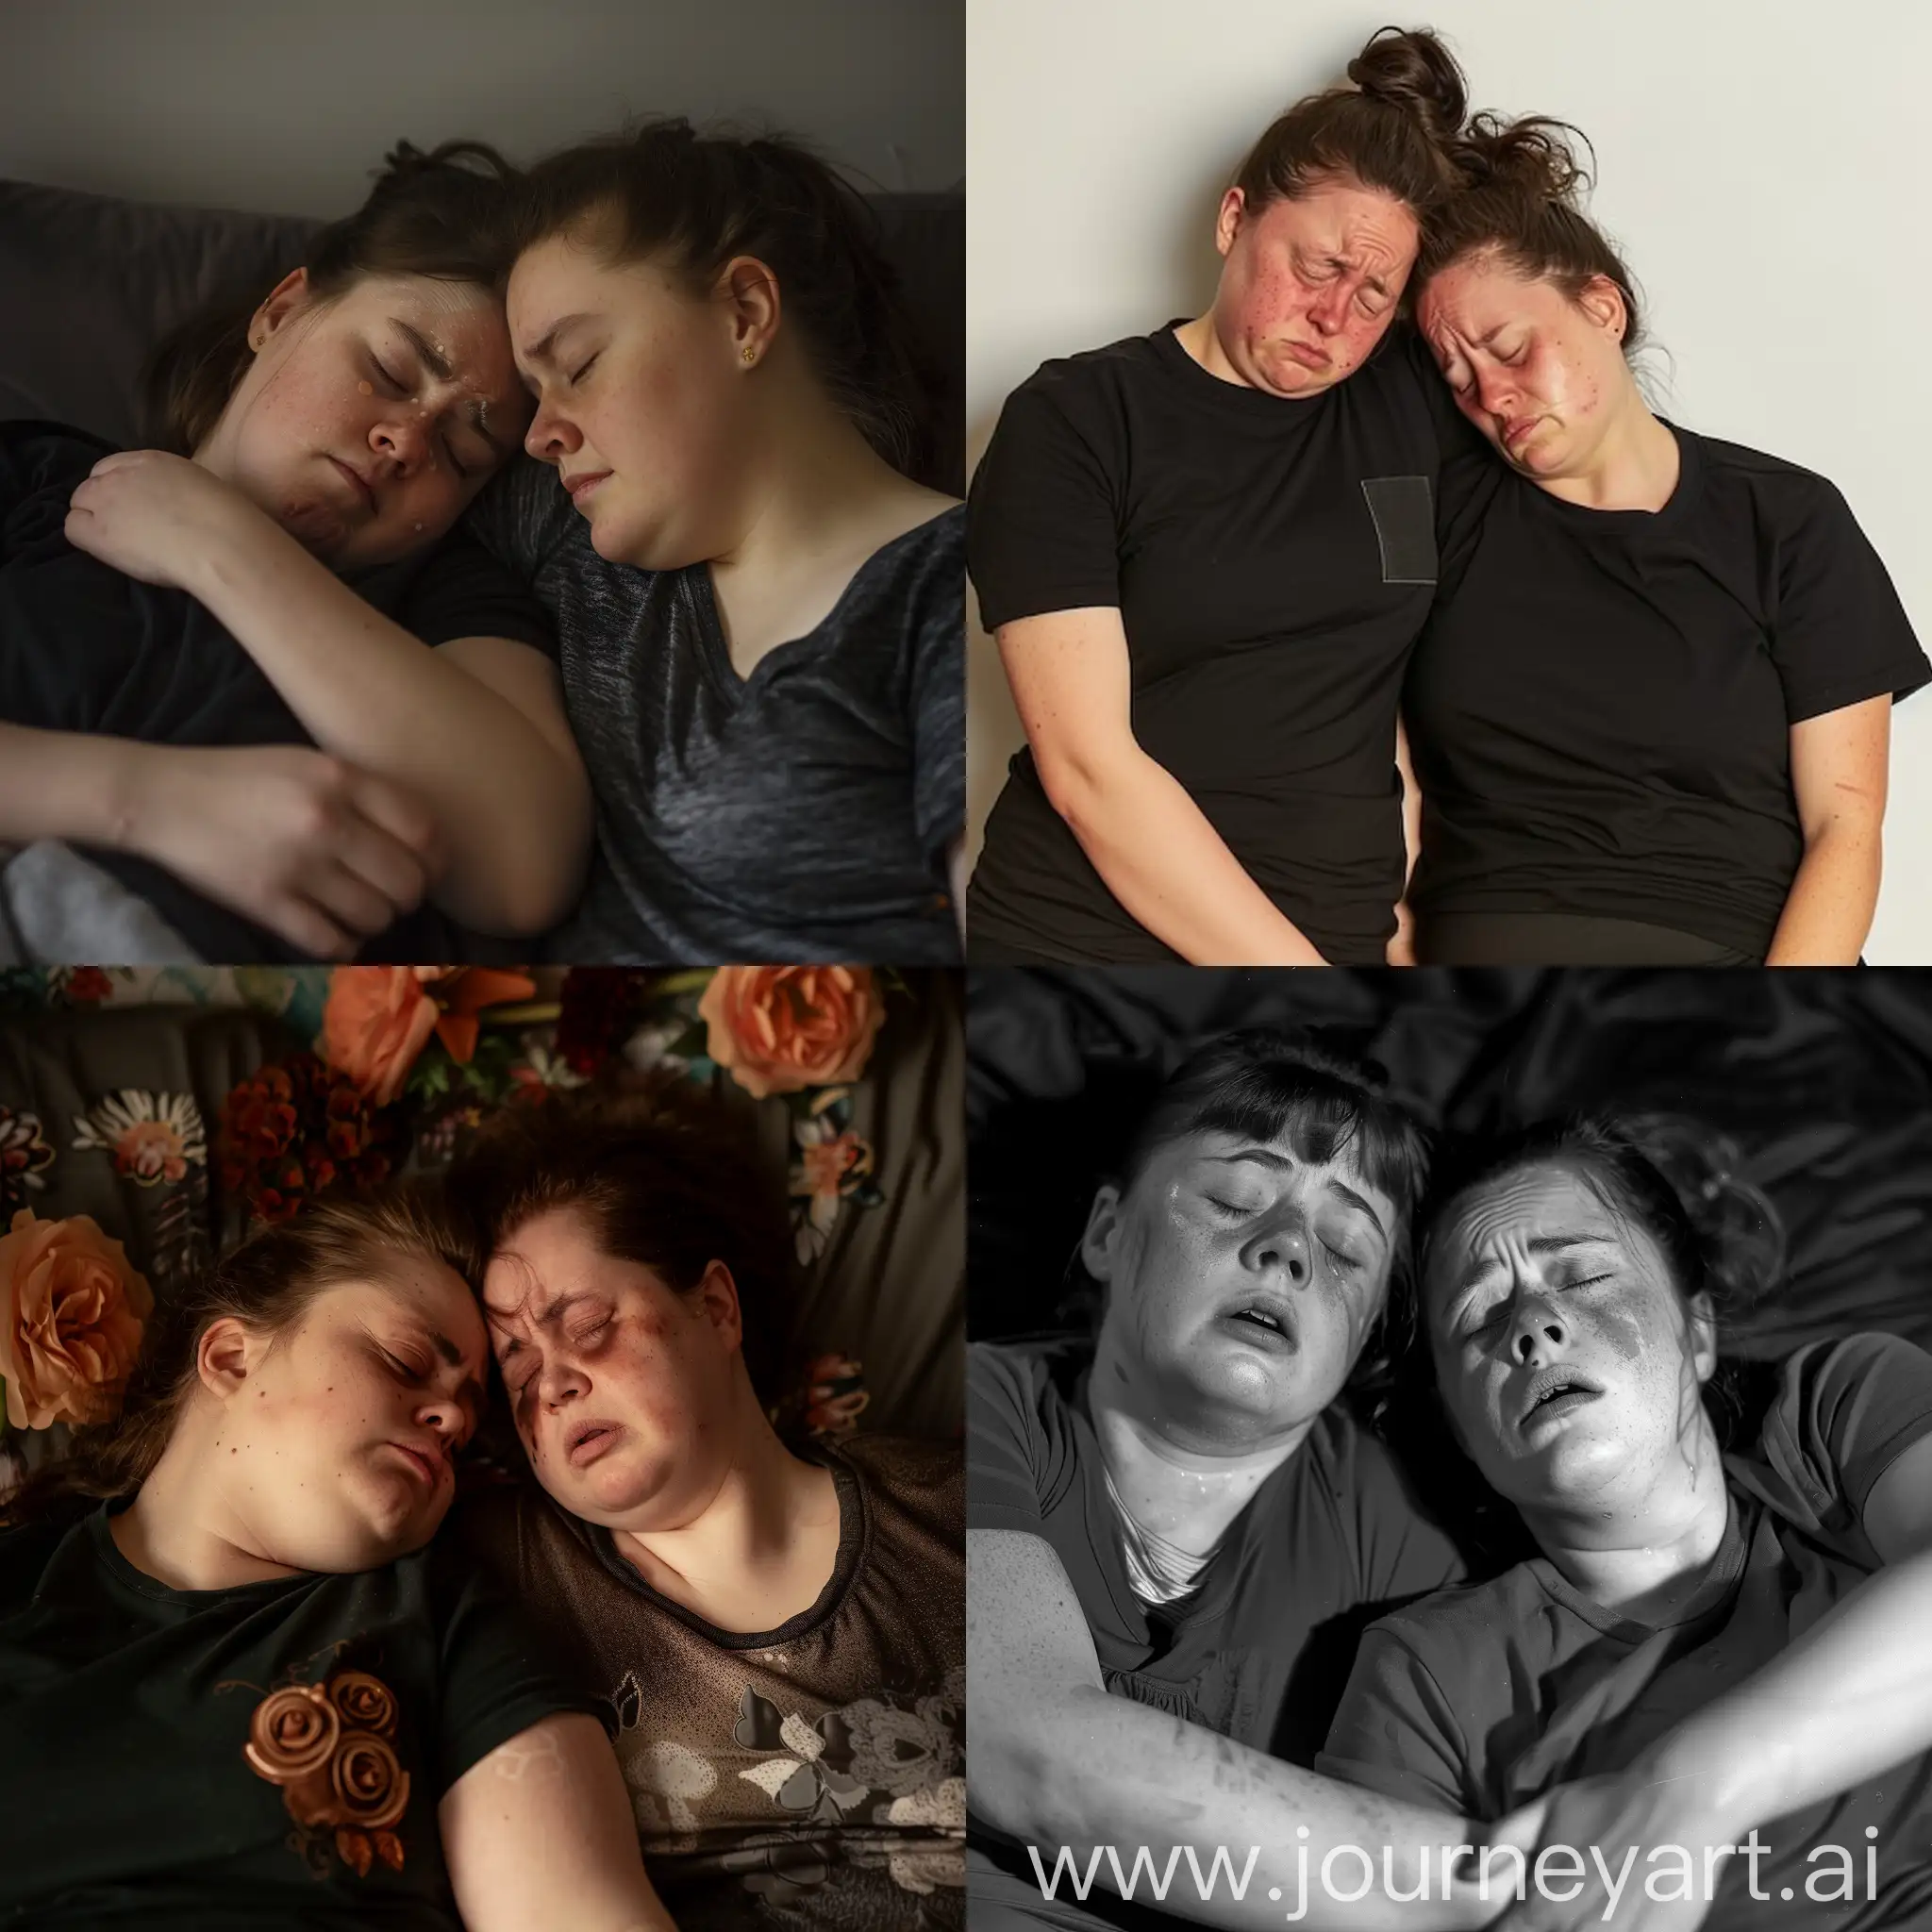 Lesbian-Couple-with-Down-Syndrome-Comforting-Each-Other-at-a-Funeral